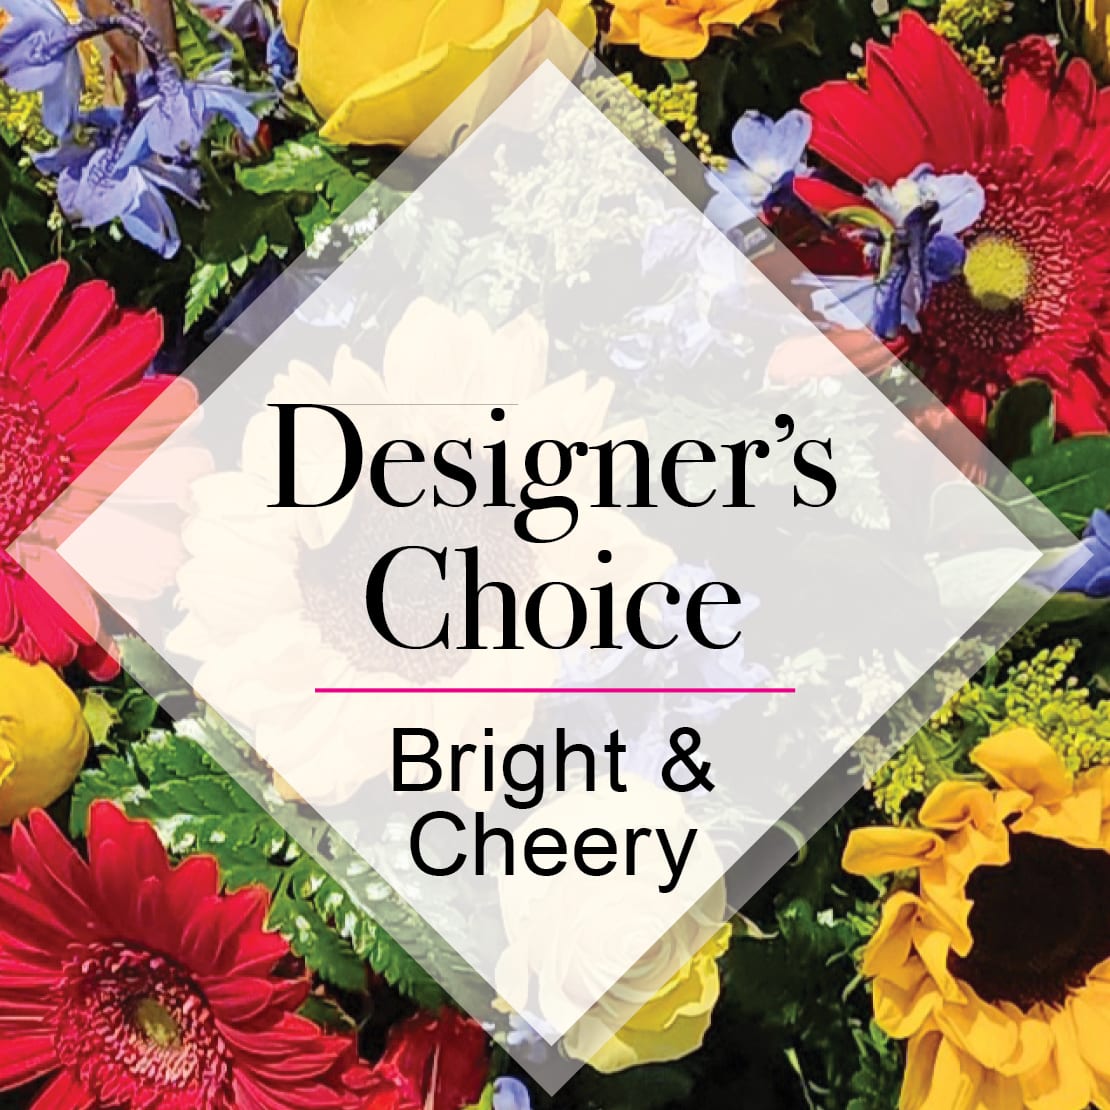 Designers Choice Bright &amp; Cheery - A selection that will be predominately the color that you have chosen with accents and greenery to compliment. The designers have the flexibility to create something unique and beautiful for you and is often the best value for you. If you have specifics you would like to request please include in the comments / special instructions area when placing your order.